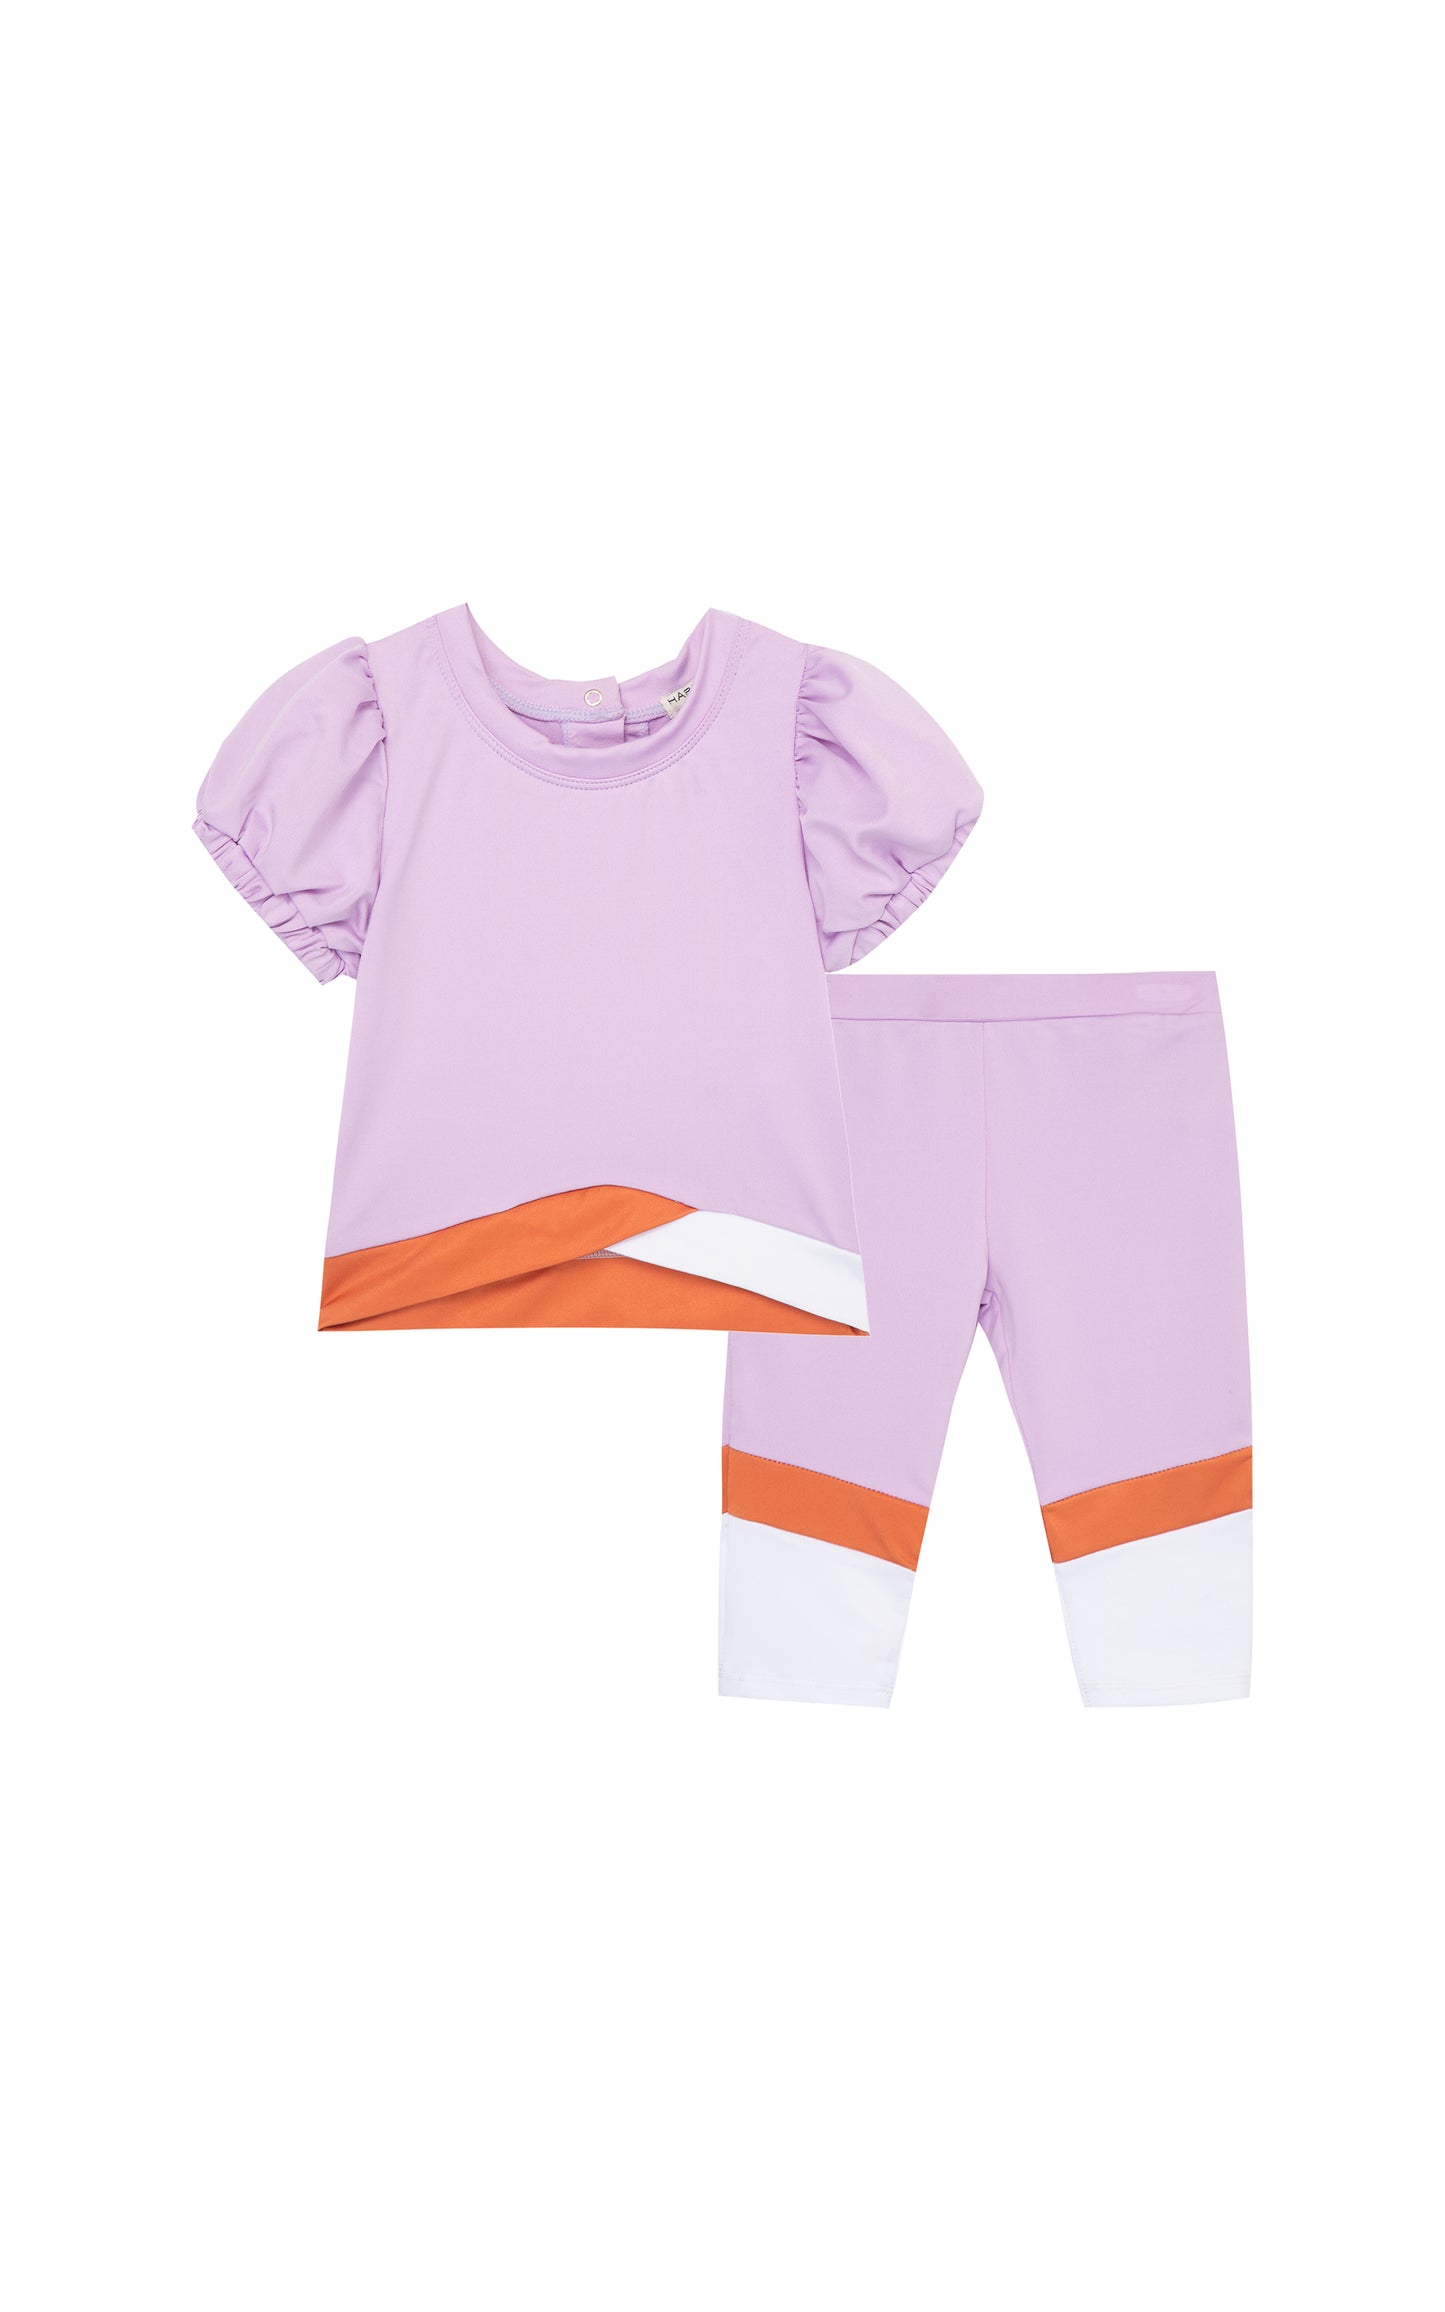 LIGHT PURPLE T-SHIRT WITH ORANGE AND WHITE STRIPES, RUFFLE SLEEVES, AND MATCHING LEGGINGS 